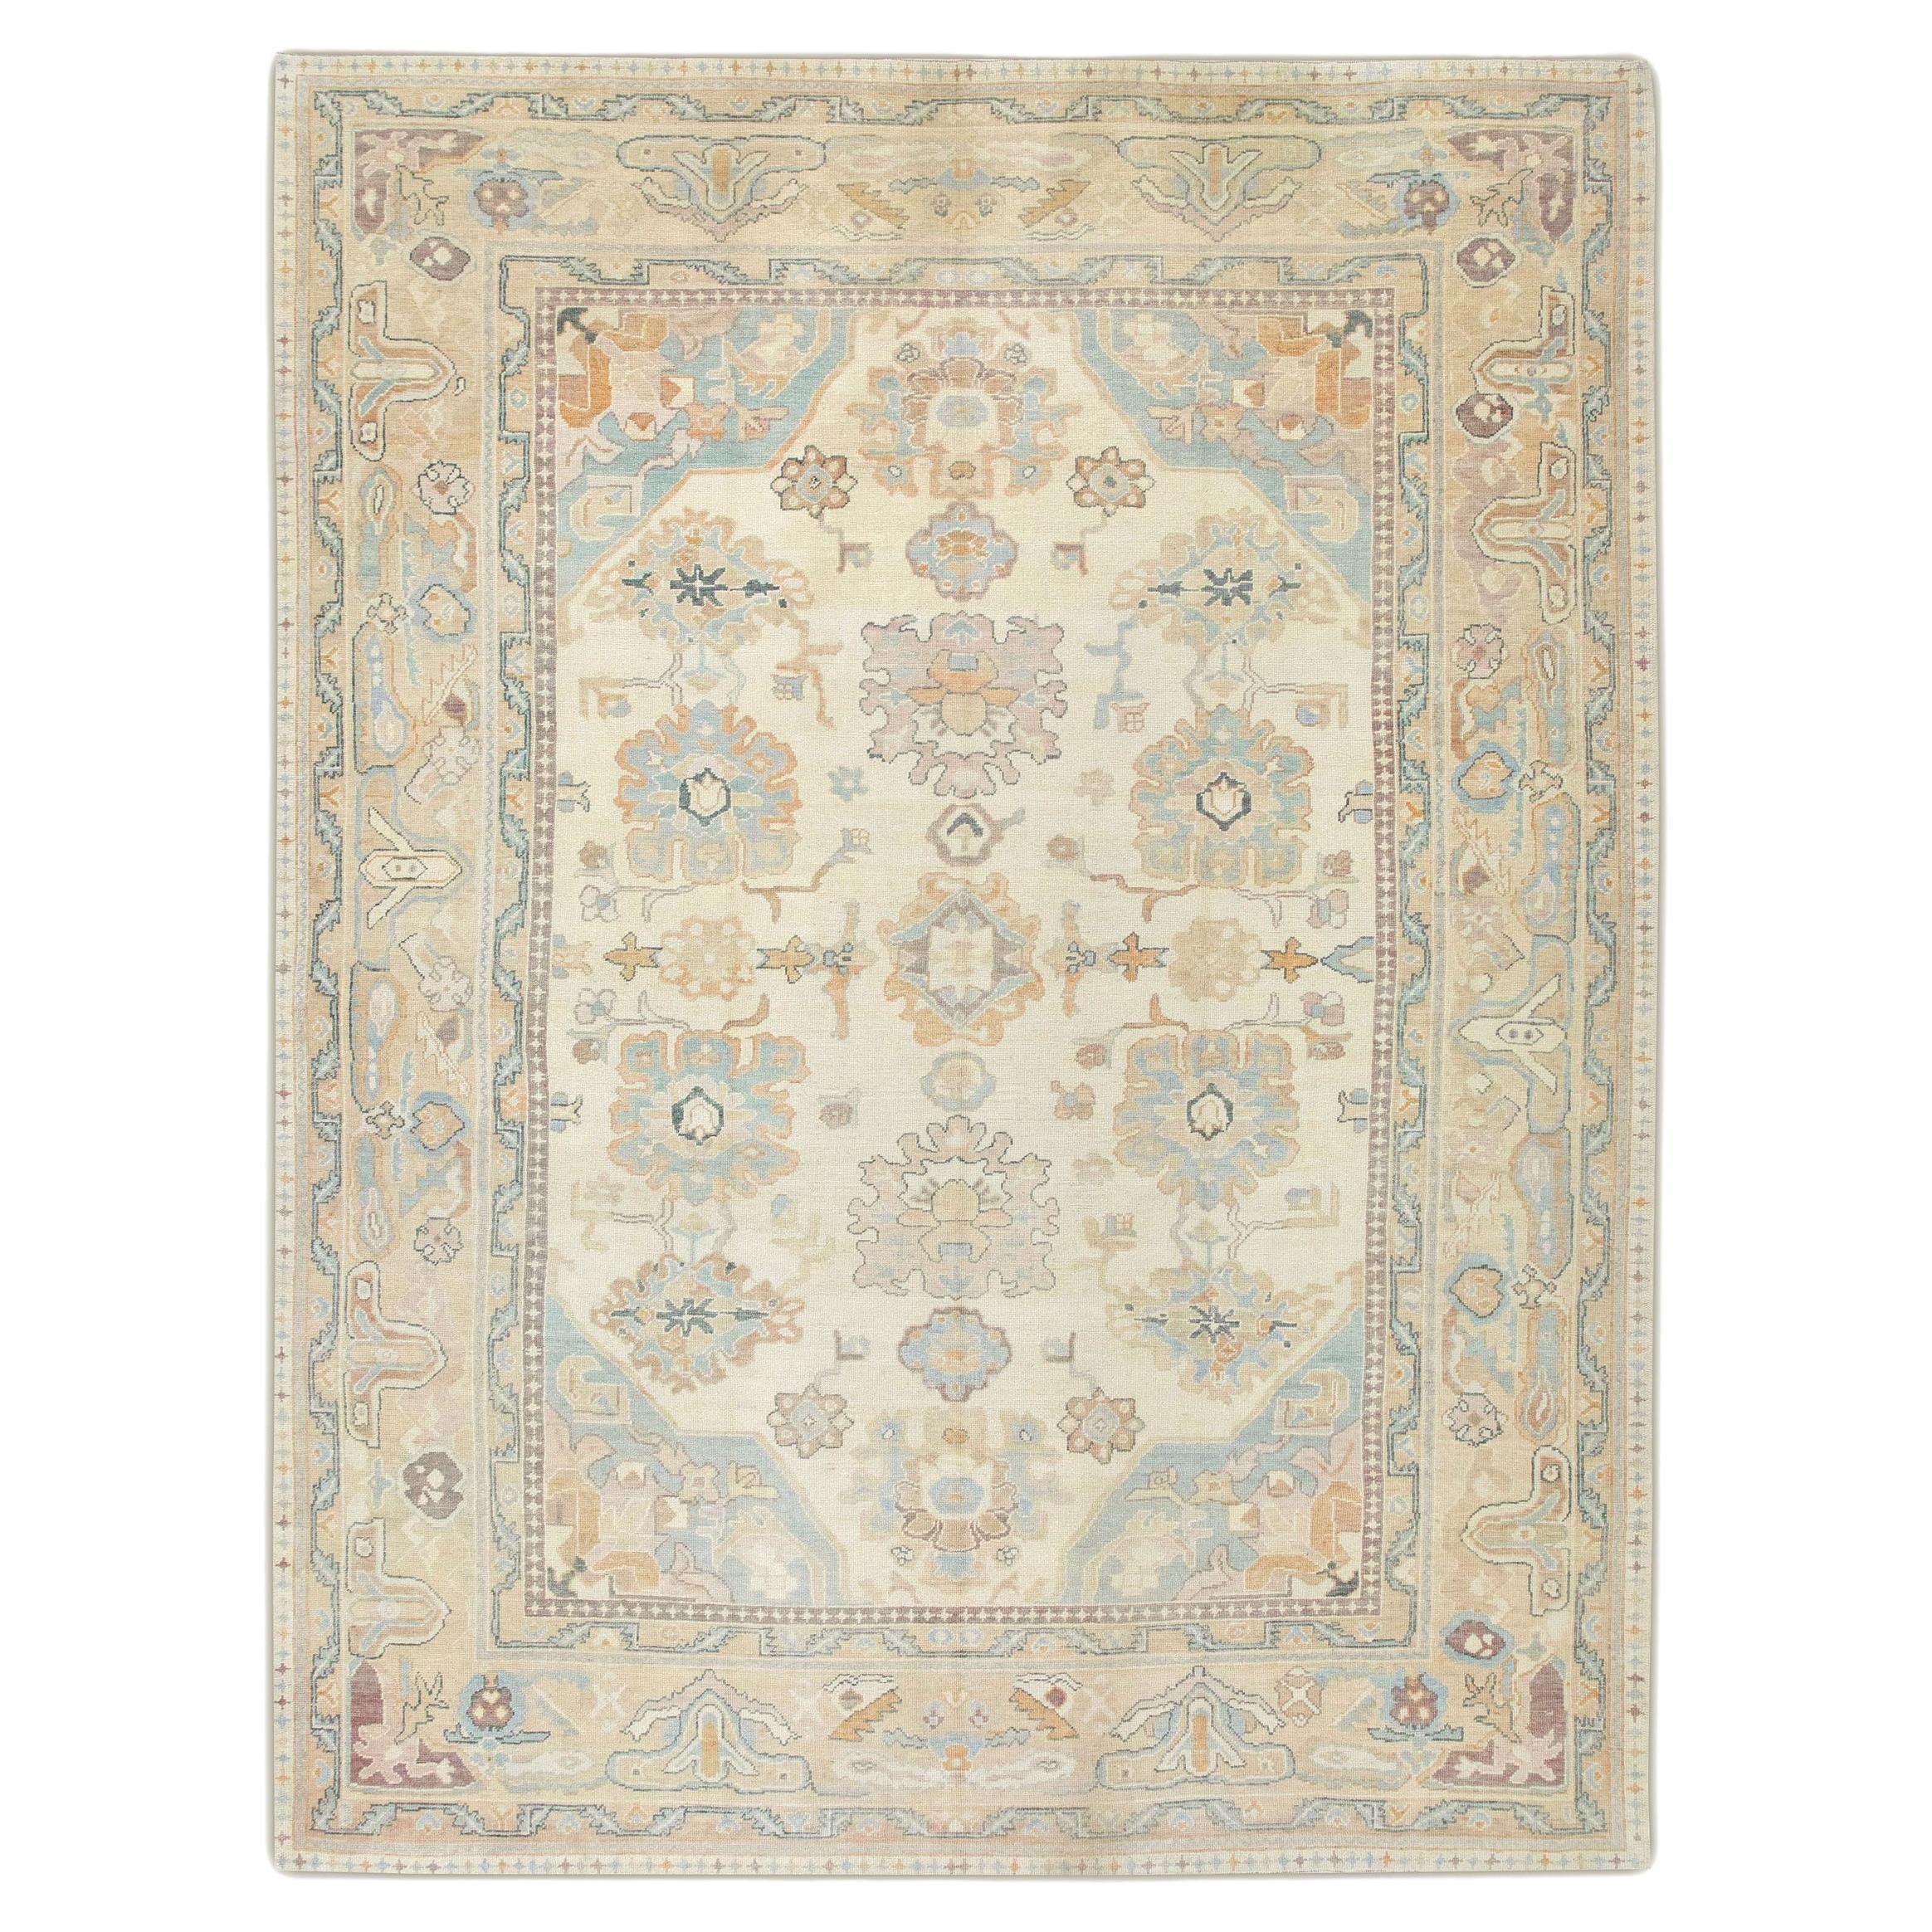 Tan Multicolor Floral Handwoven Wool Oversized Turkish Oushak Rug 11' x 15'3"